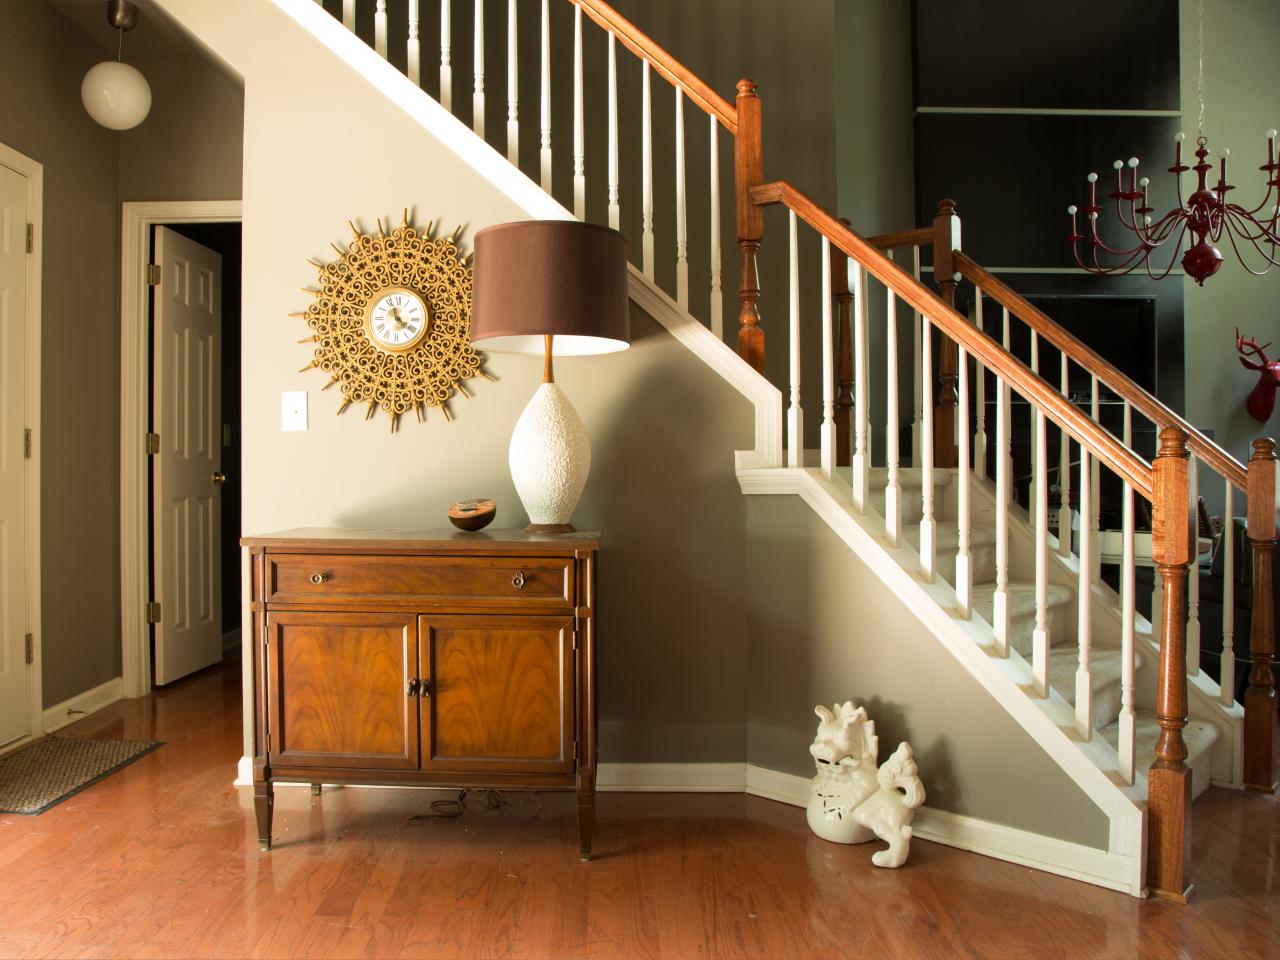  Affordable Ways to Update an Entryway